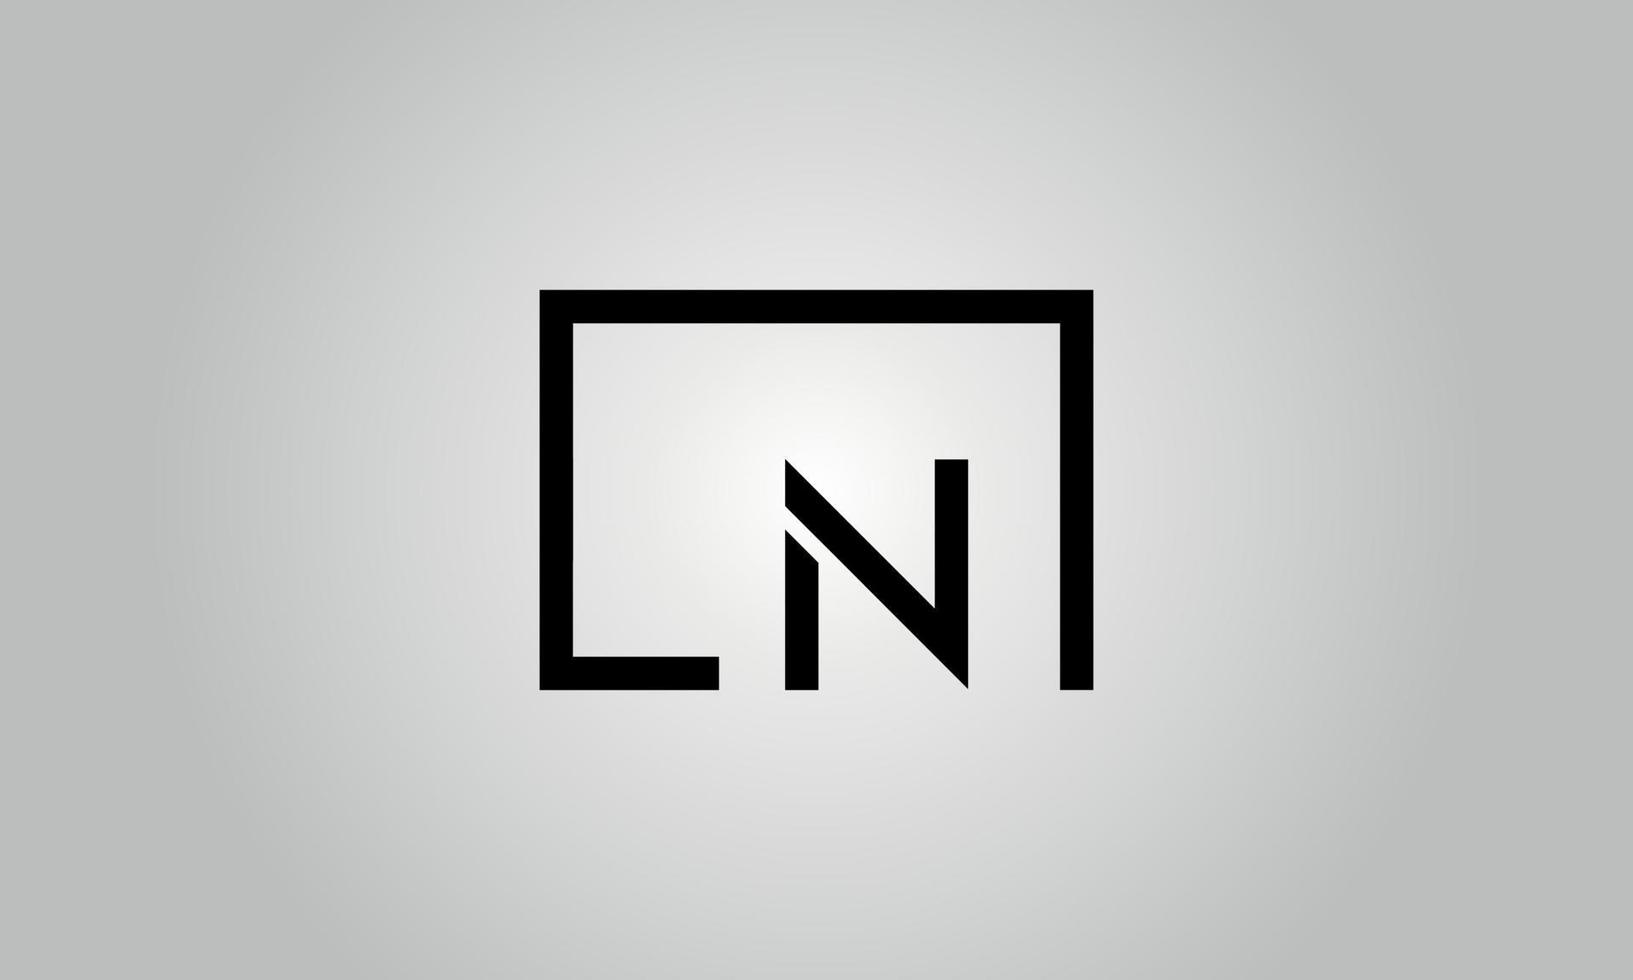 Letter LN logo design. LN logo with square shape in black colors vector free vector template.